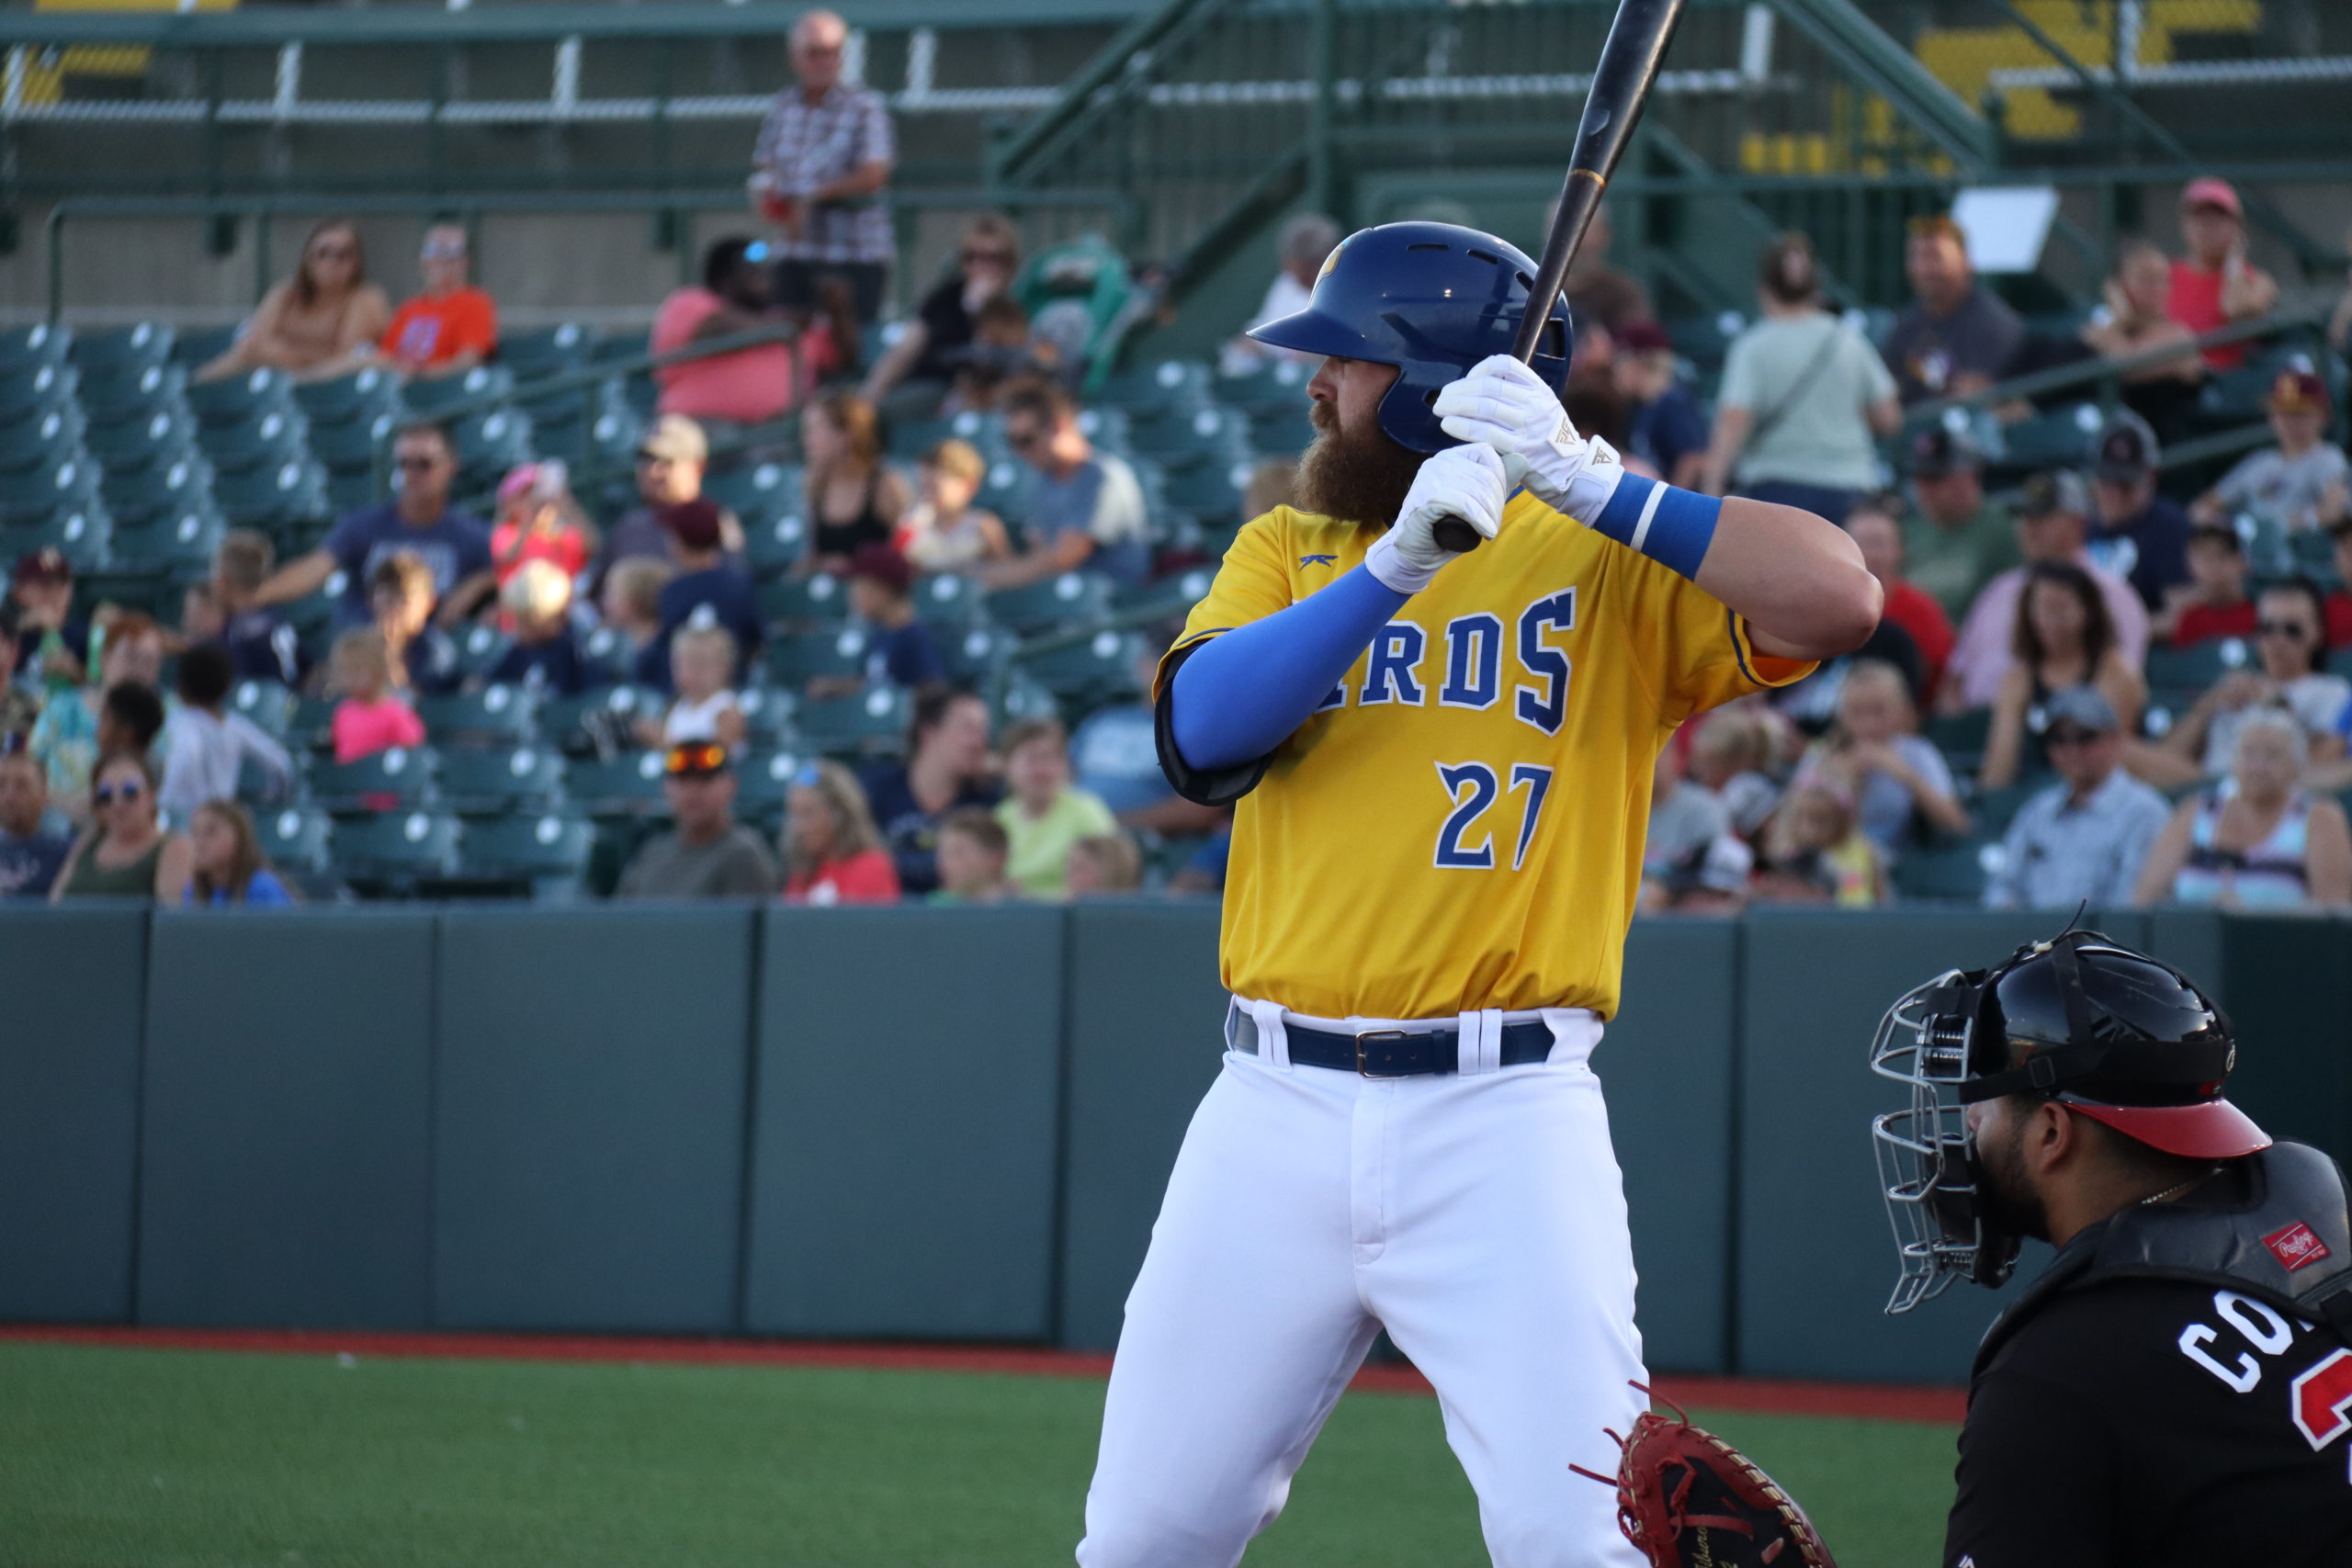 HENRY TIES FRANCHISE HITS RECORD AS BIRDS WRAP UP 2022 SEASON